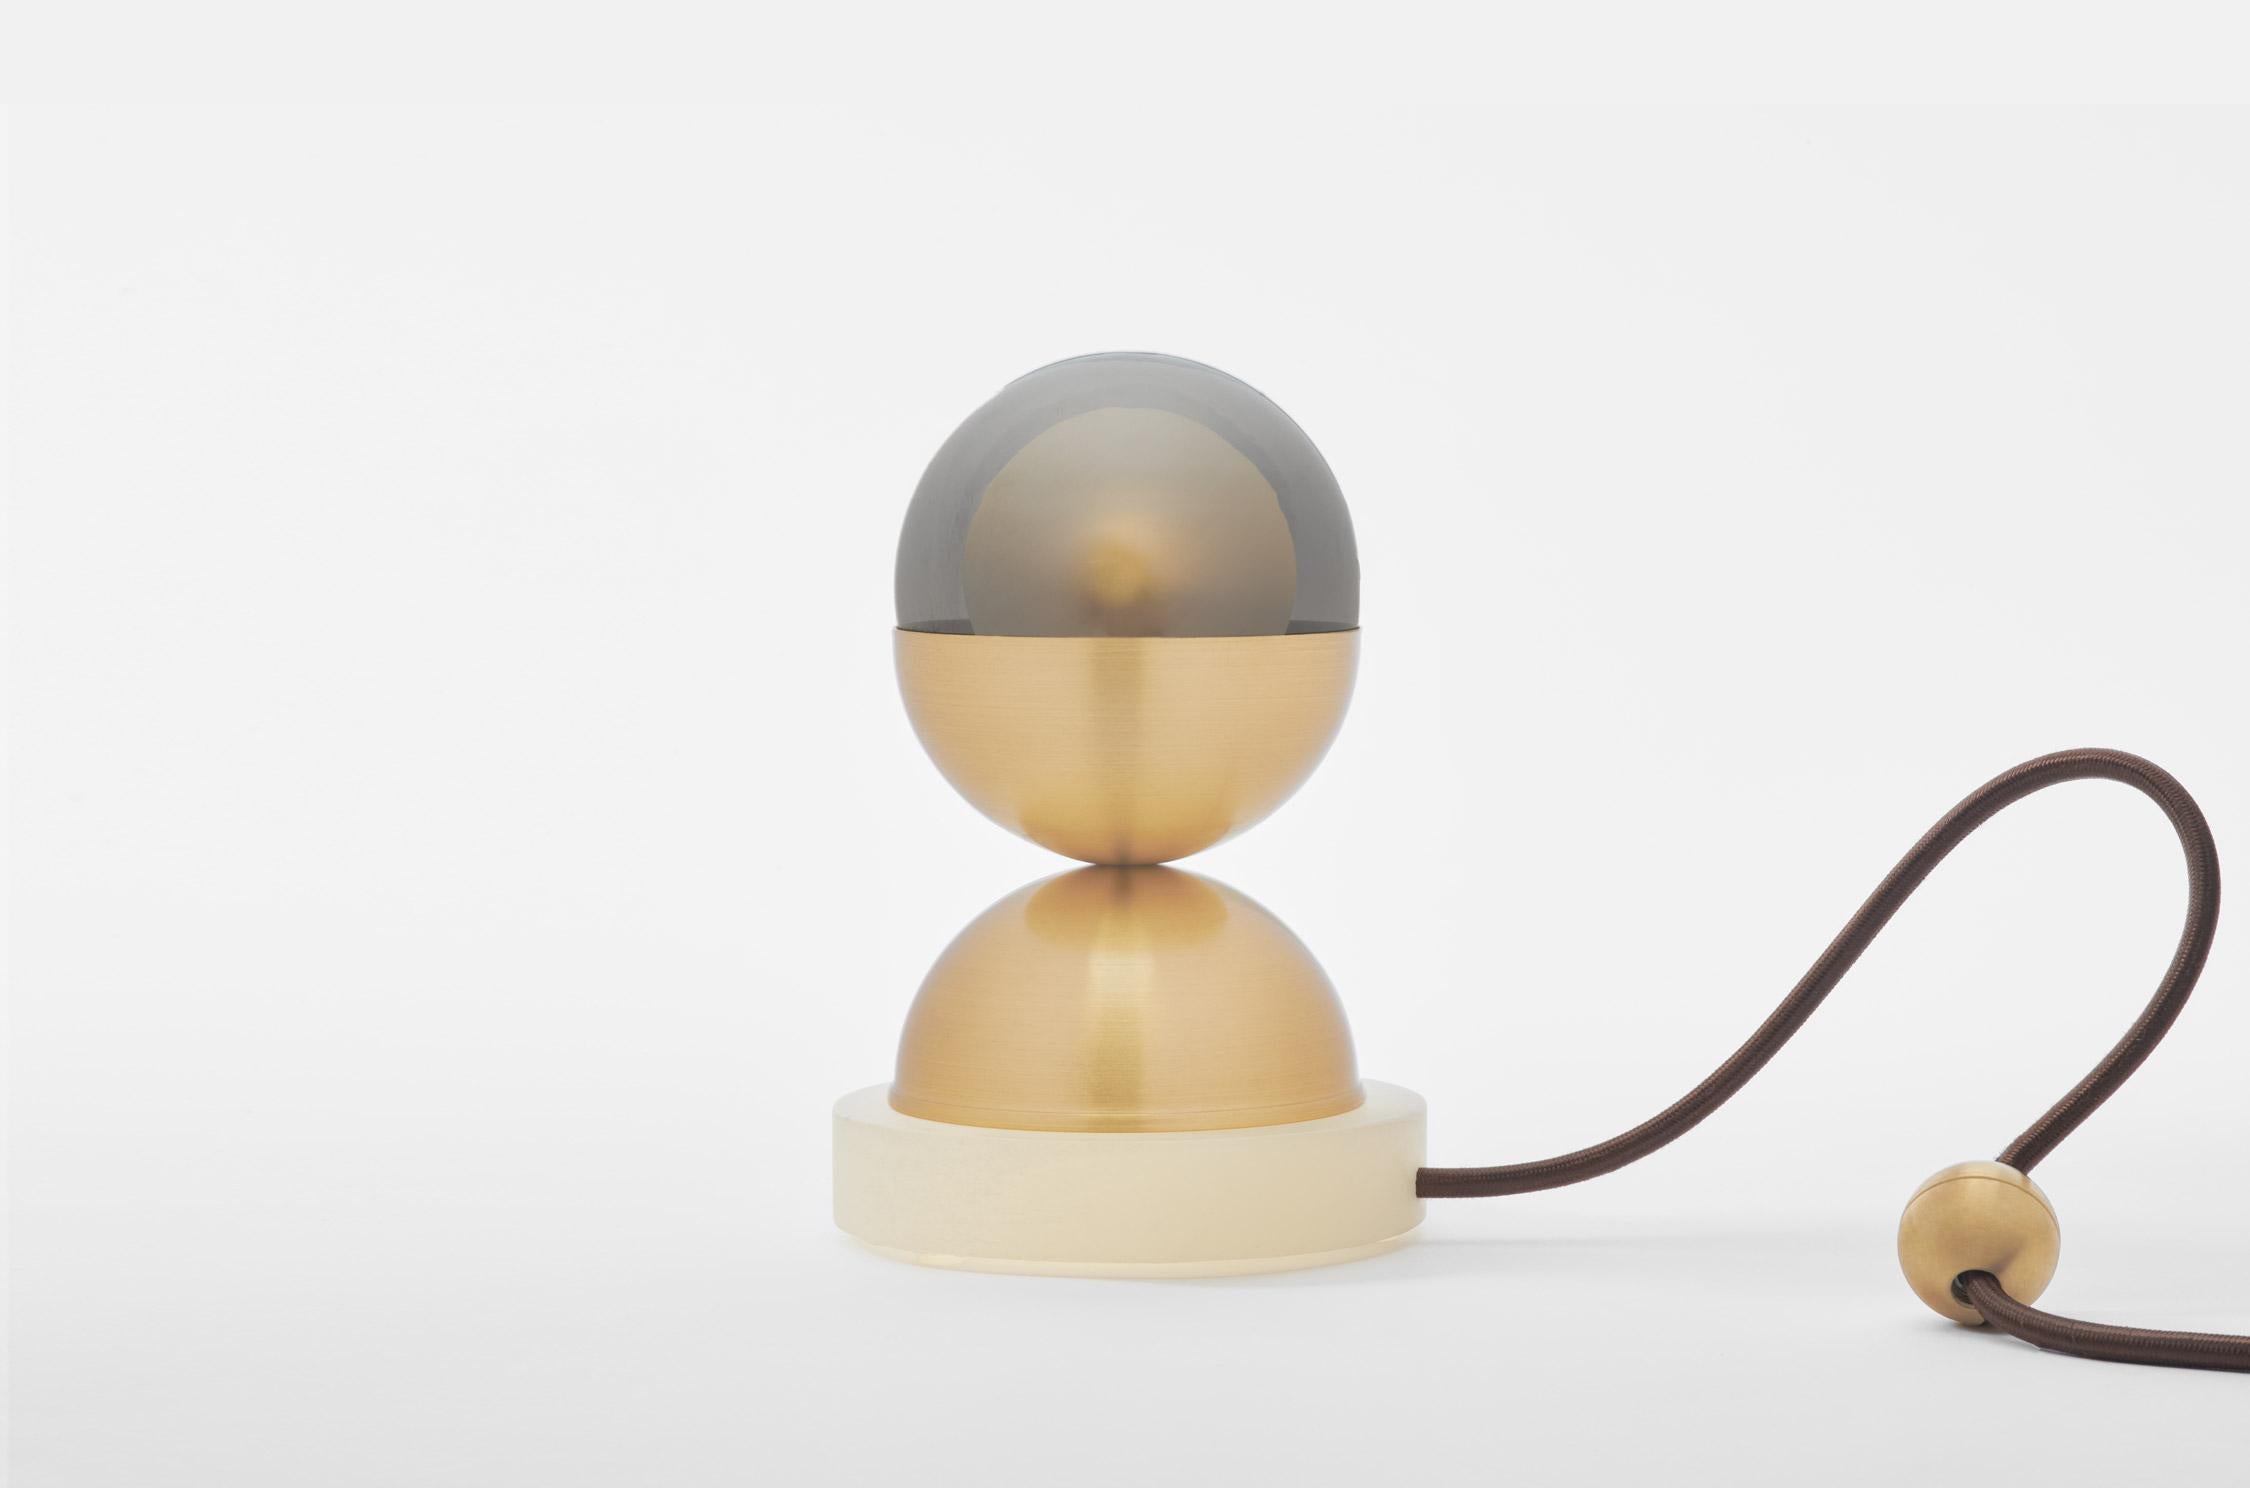 The bloom table Lamp's igenious design consists of glass, metal, and marble parts. The double glass orb (our Kadur pendant) rests inside a metal half-sphere, which is in turn balanced on another metal half-sphere attached to a round marble base. The